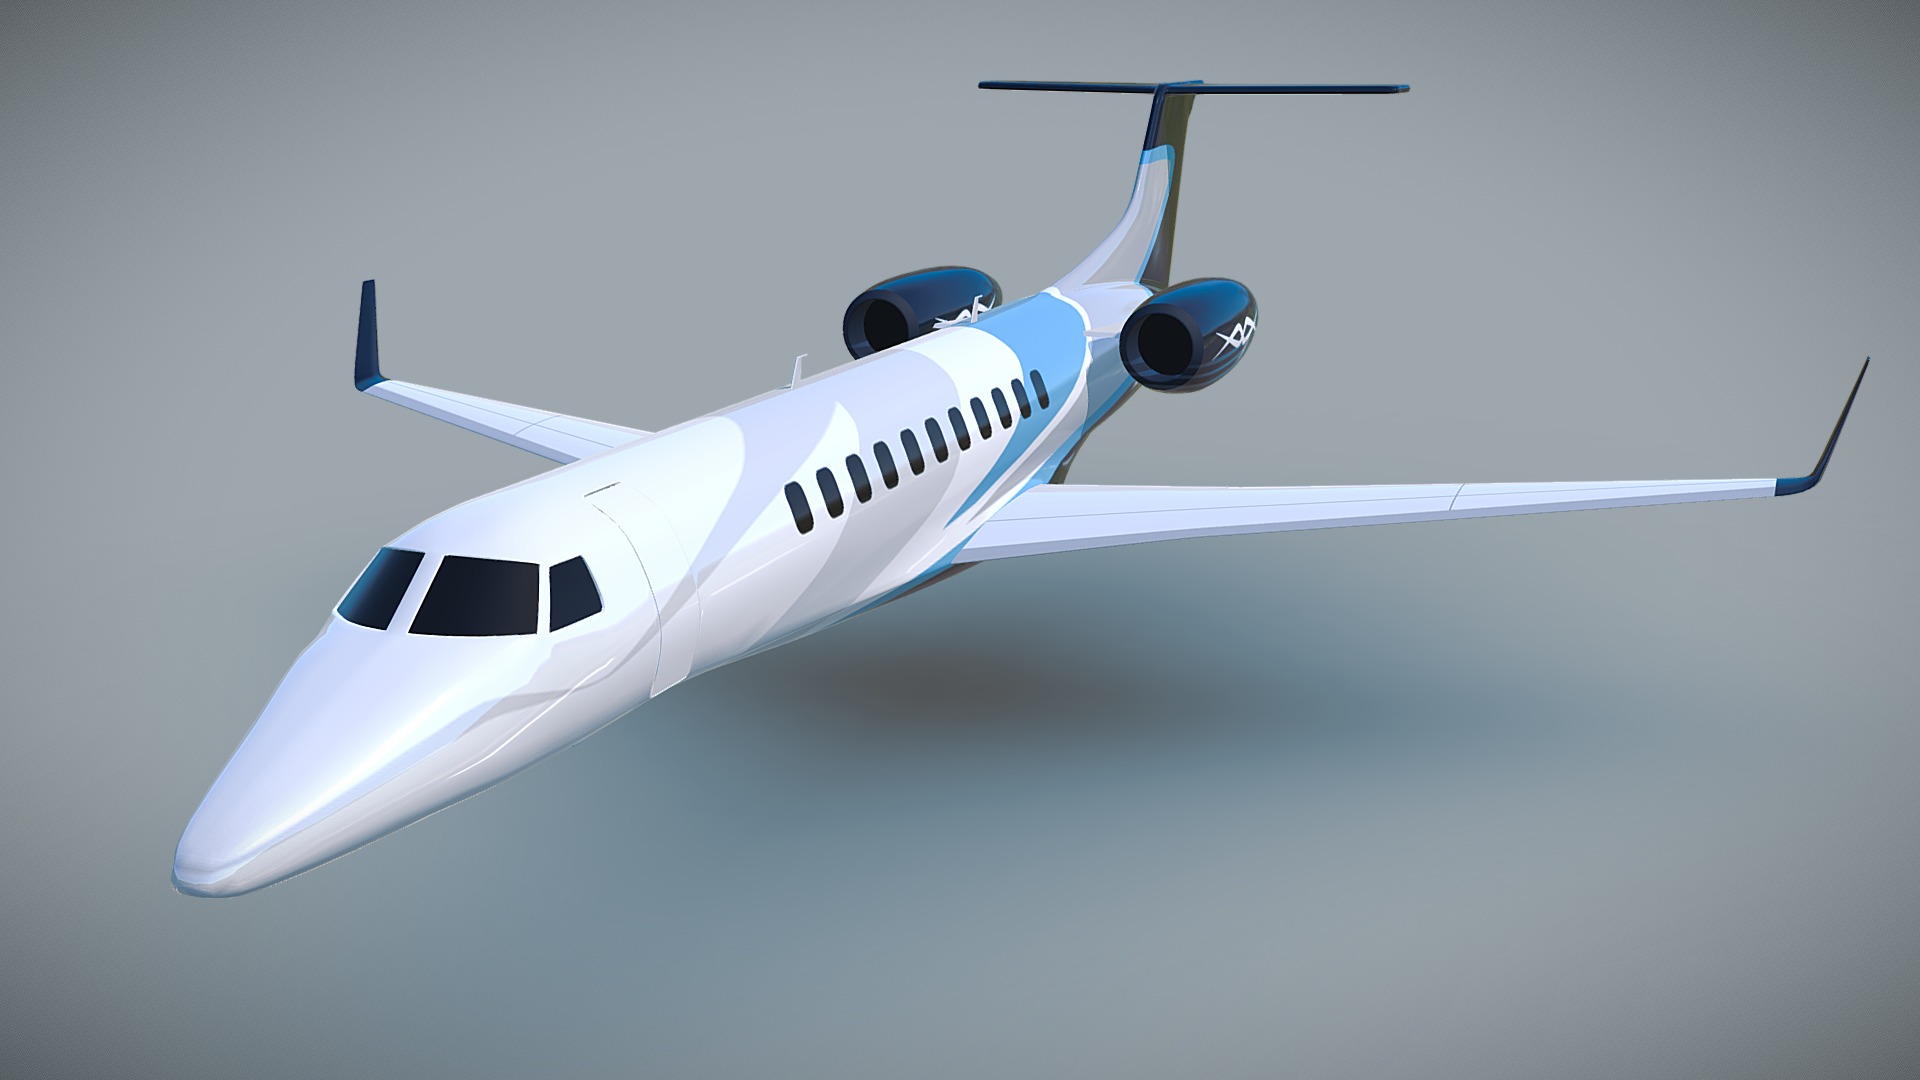 3d model of business jet was created with blender3d 2.72 version.Rendering images preview was created with blender internal render,rendering setting included with blender file.There are no interior and no landing gears for this product.There are 3 separated texture imagesone for fuselage 2050x2050px png with stripes and windows,second for wings with elevator details,and third for engine stripes both are 1050x1050px png file.Product was named by object and materials.Rendering images was did with subdivision 2,until my product was packed with subdivision 1.There is a lowpoly version of this model included with obj file without subdivsion modifier applied.Enjoy my product 3d model